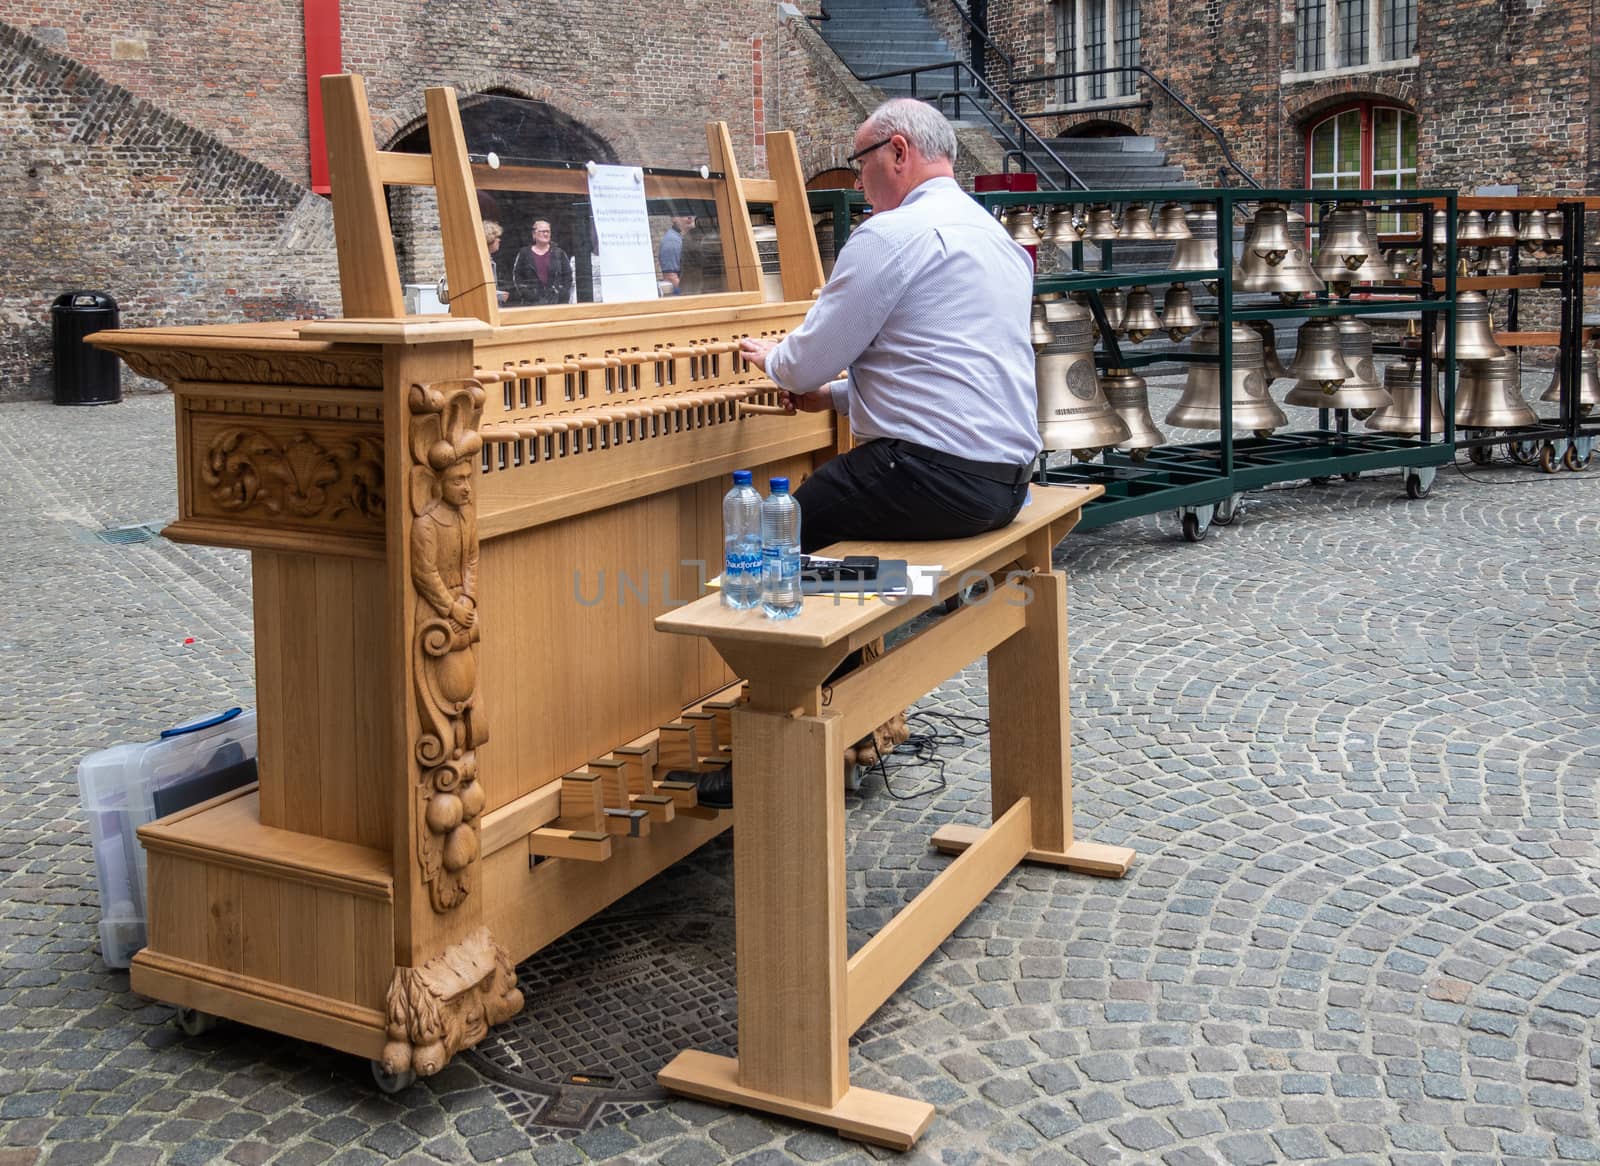 Bruges, Flanders, Belgium -  June 15, 2019: Musician plays the electronic Carillon with keyboard, pedals and batons on the square inside the Belfry.